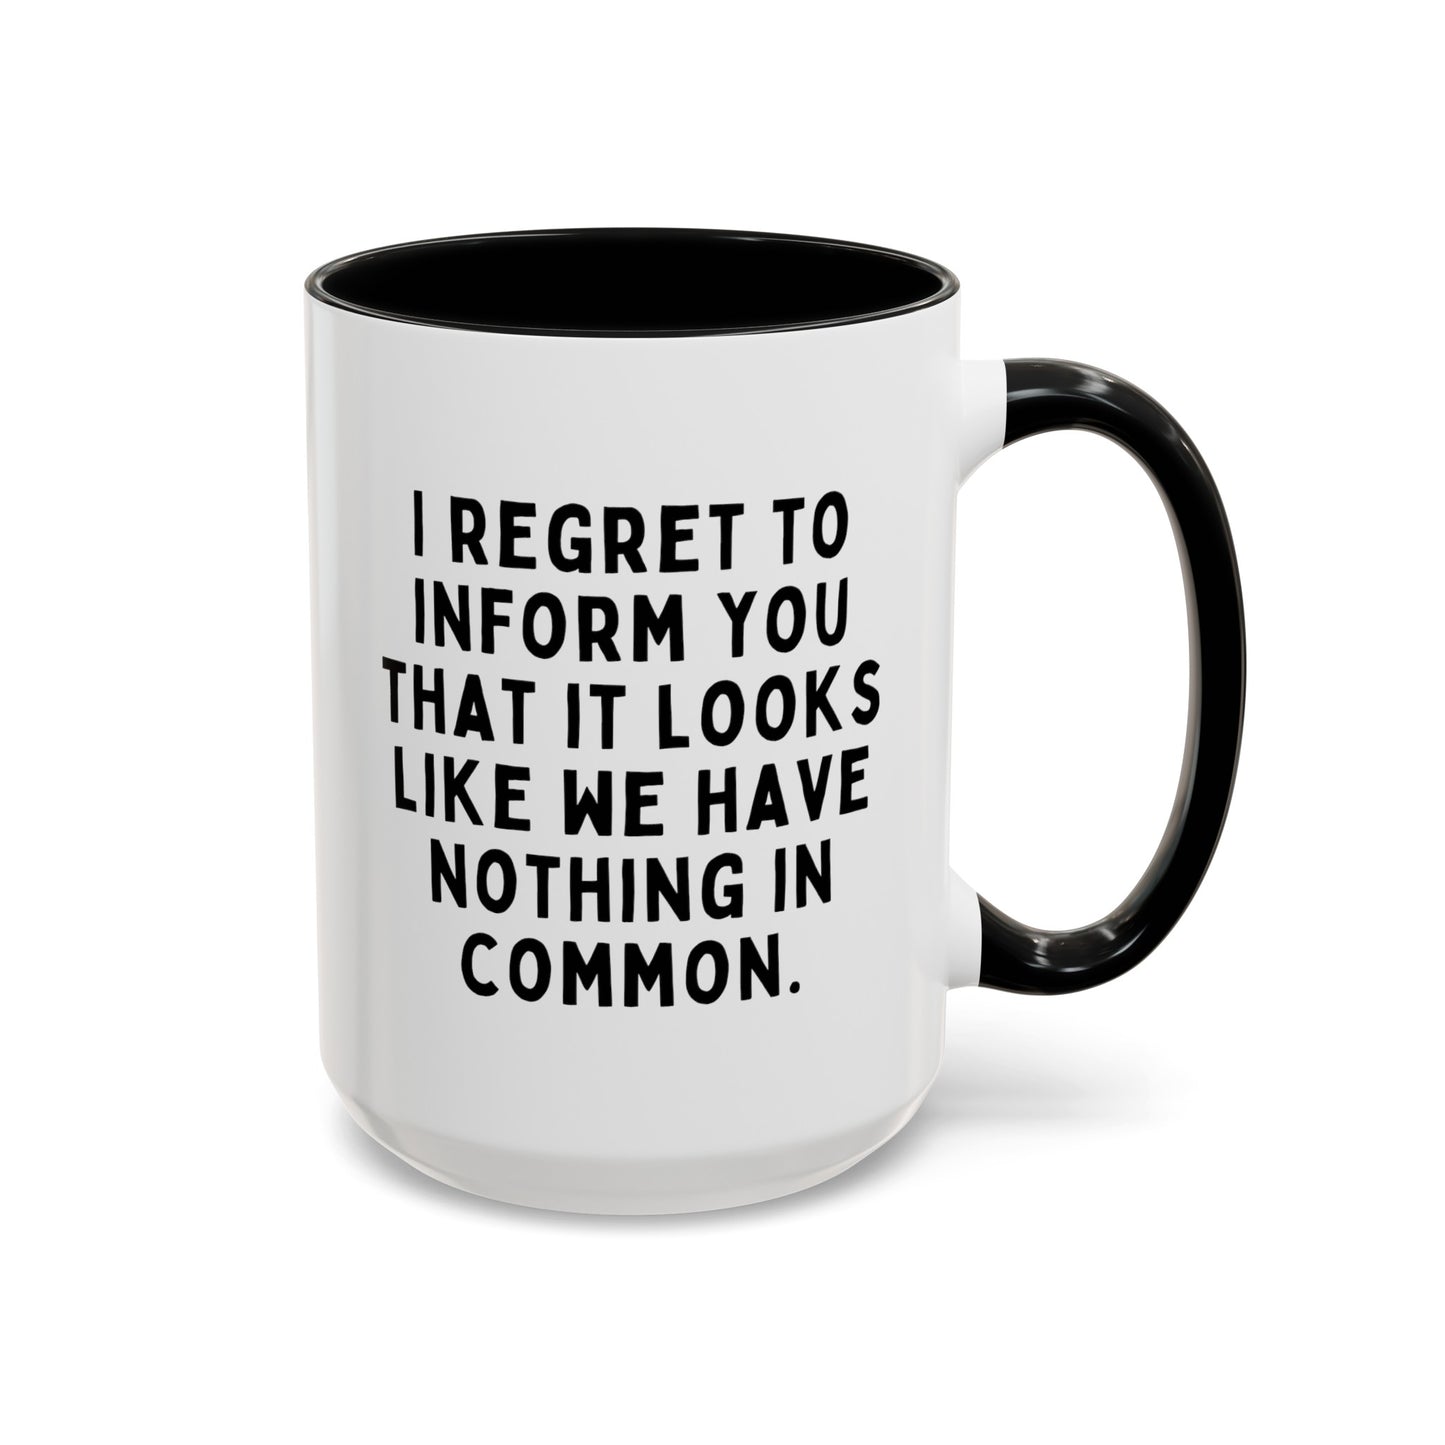 I Regret To Inform You That It Looks Like We Have Nothing In Common 15oz white with black accent funny large coffee mug gift for coworker best friend sarcastic sarcasm secret santa colleague waveywares wavey wares wavywares wavy wares